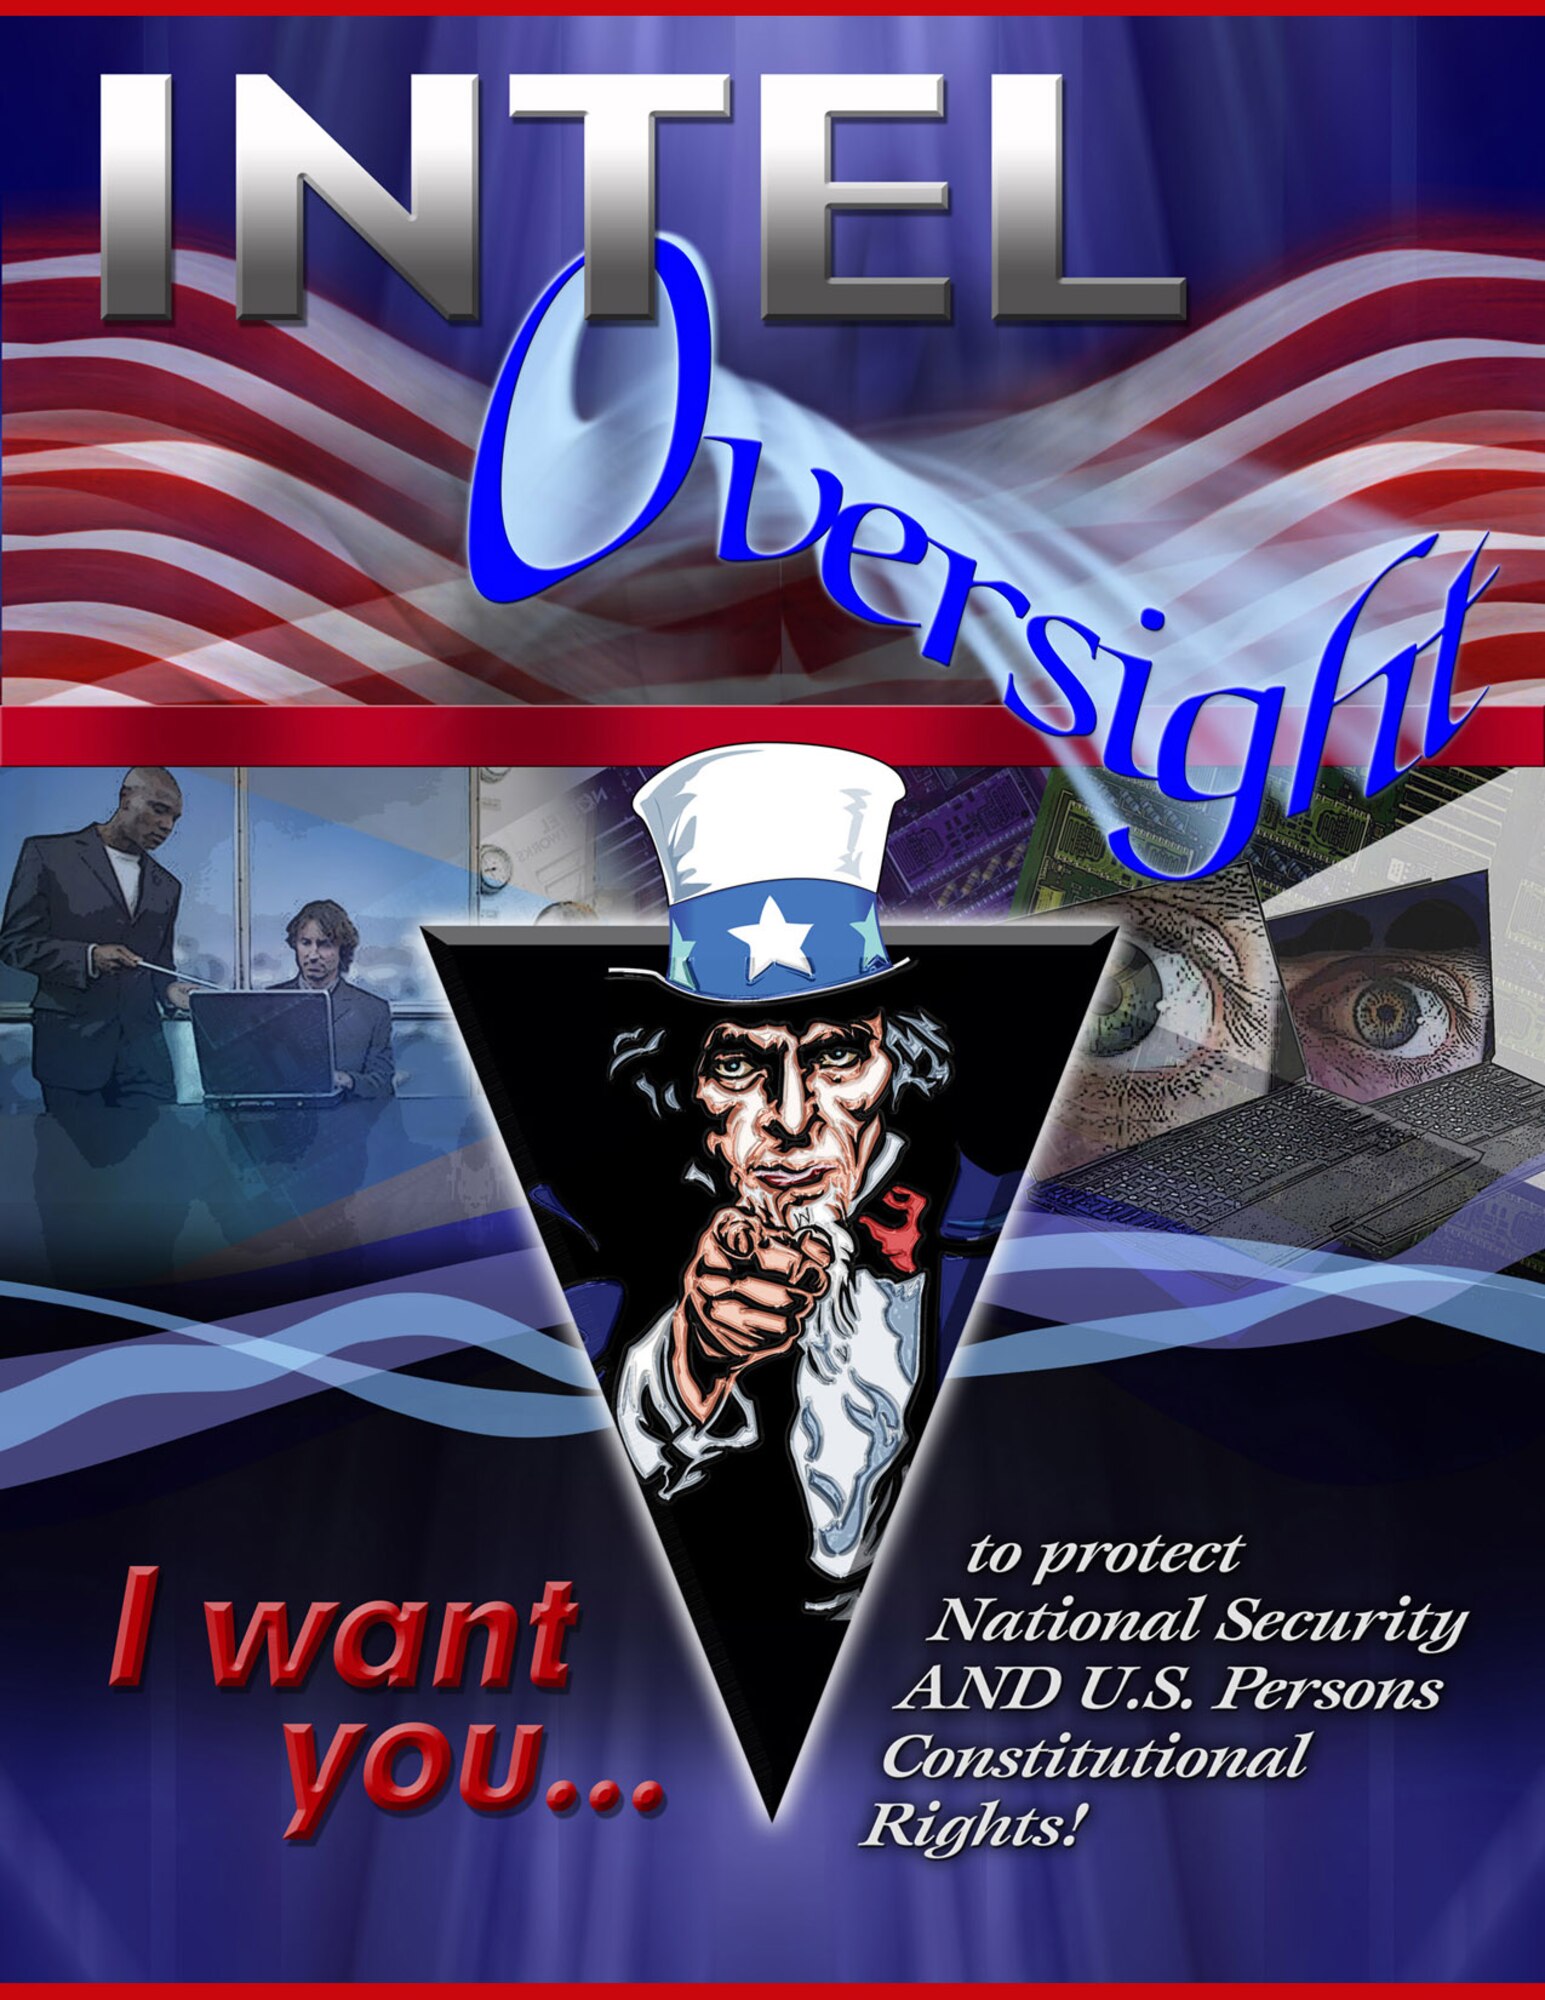 The Air Force Intelligence, Surveillance and Reconnaissance Agency Interlligence Oversight Training program balances intellligence gathering for national security with protecting the rights of all U.S. persons. (Graphic by Gloria Vasquez)